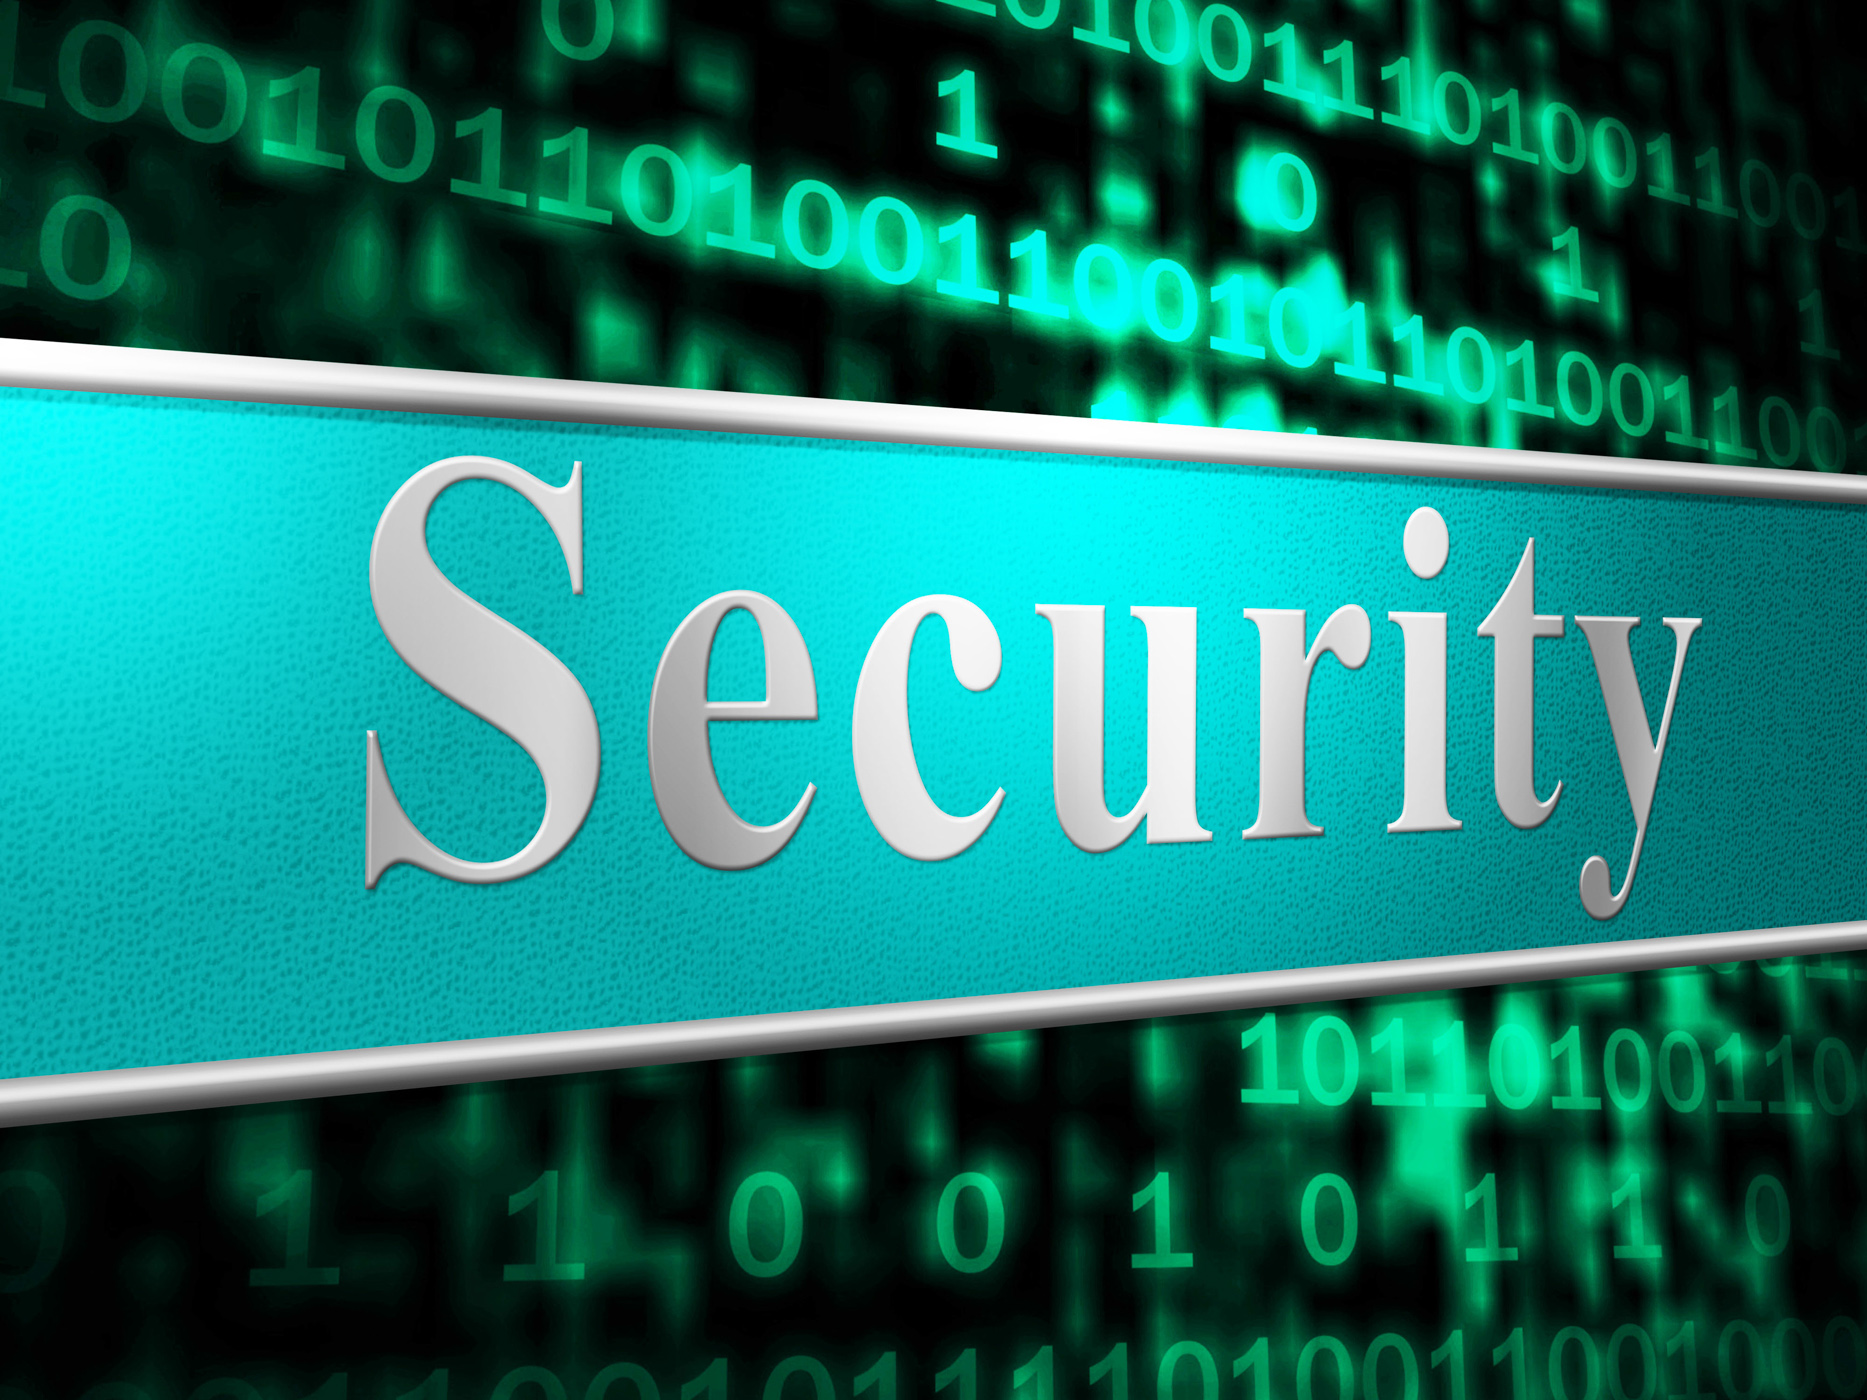 Securities meaning. N Медиа. Security meaning